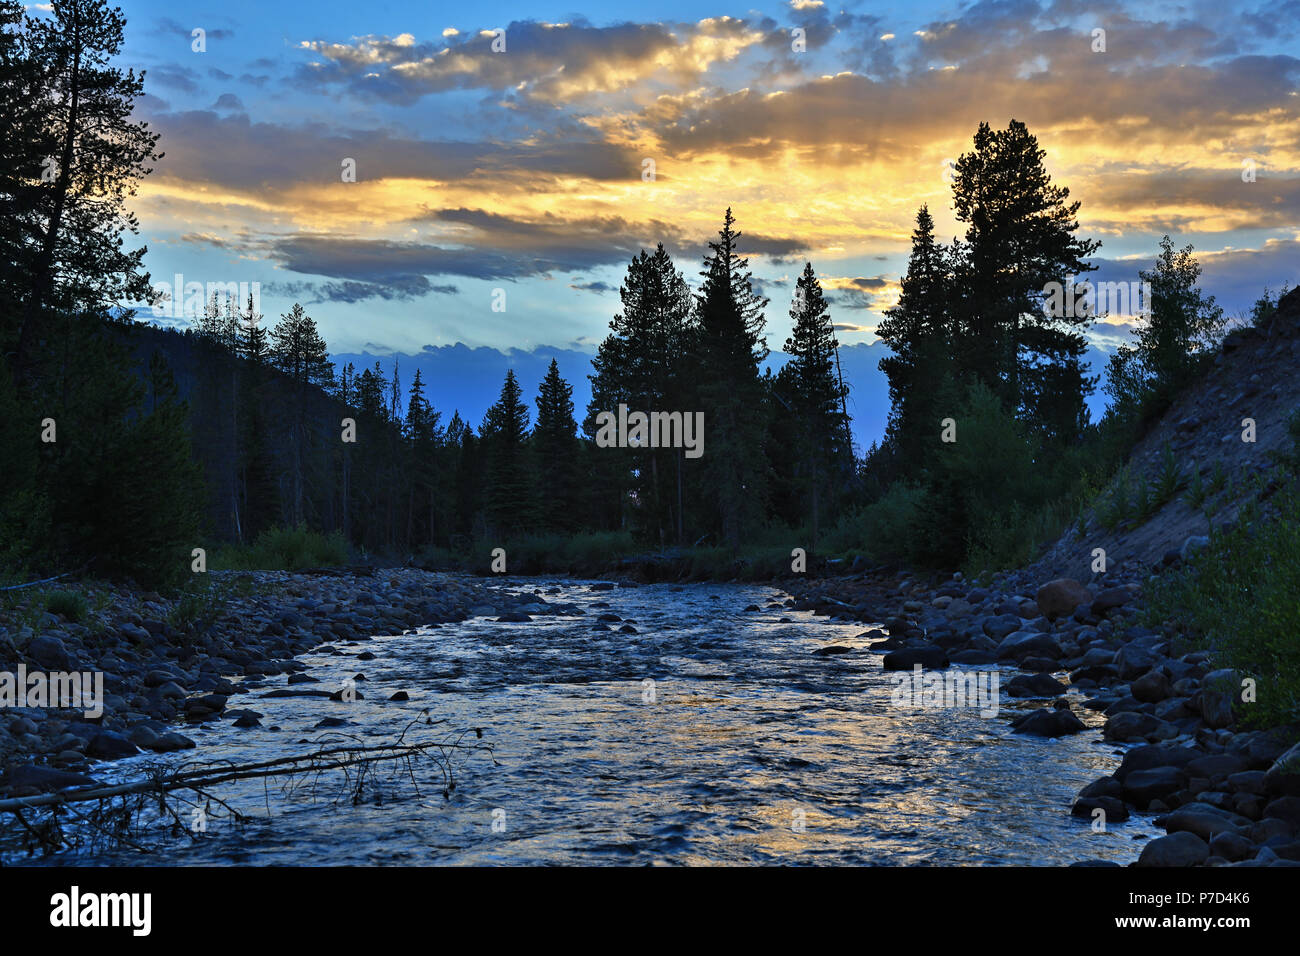 In this scene the setting sun reflects on the Provo River in the Soapstone area of the Uinta Mountains, Uinta-Wasatch-Cache National Forest of Utah. Stock Photo